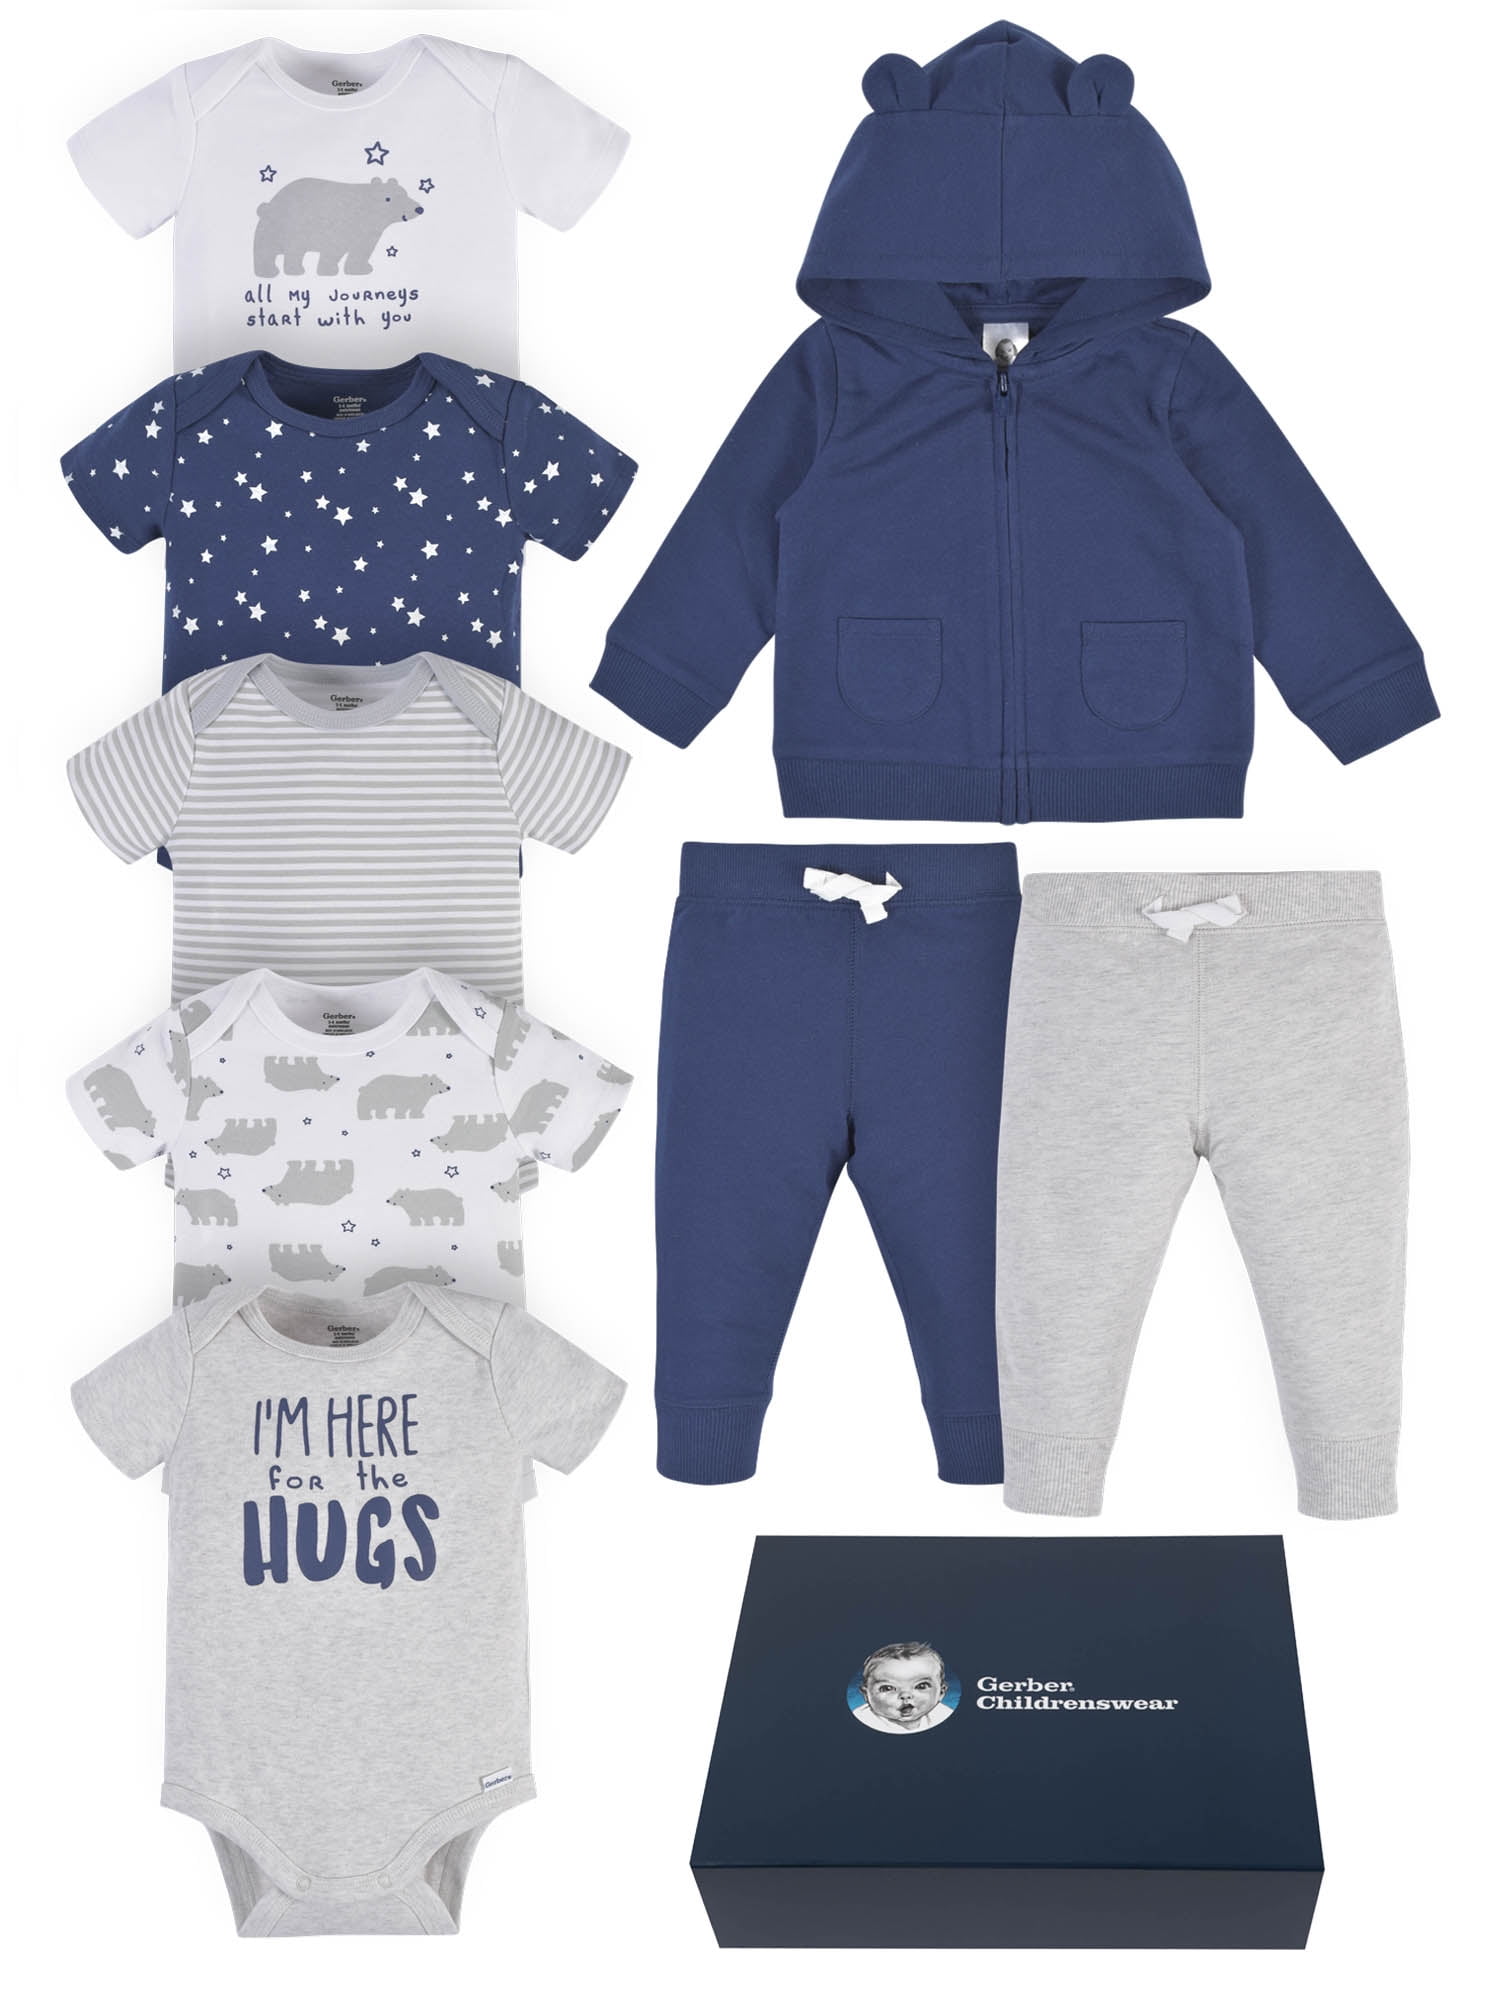 II. Importance of Choosing the Right Clothing for Your Baby